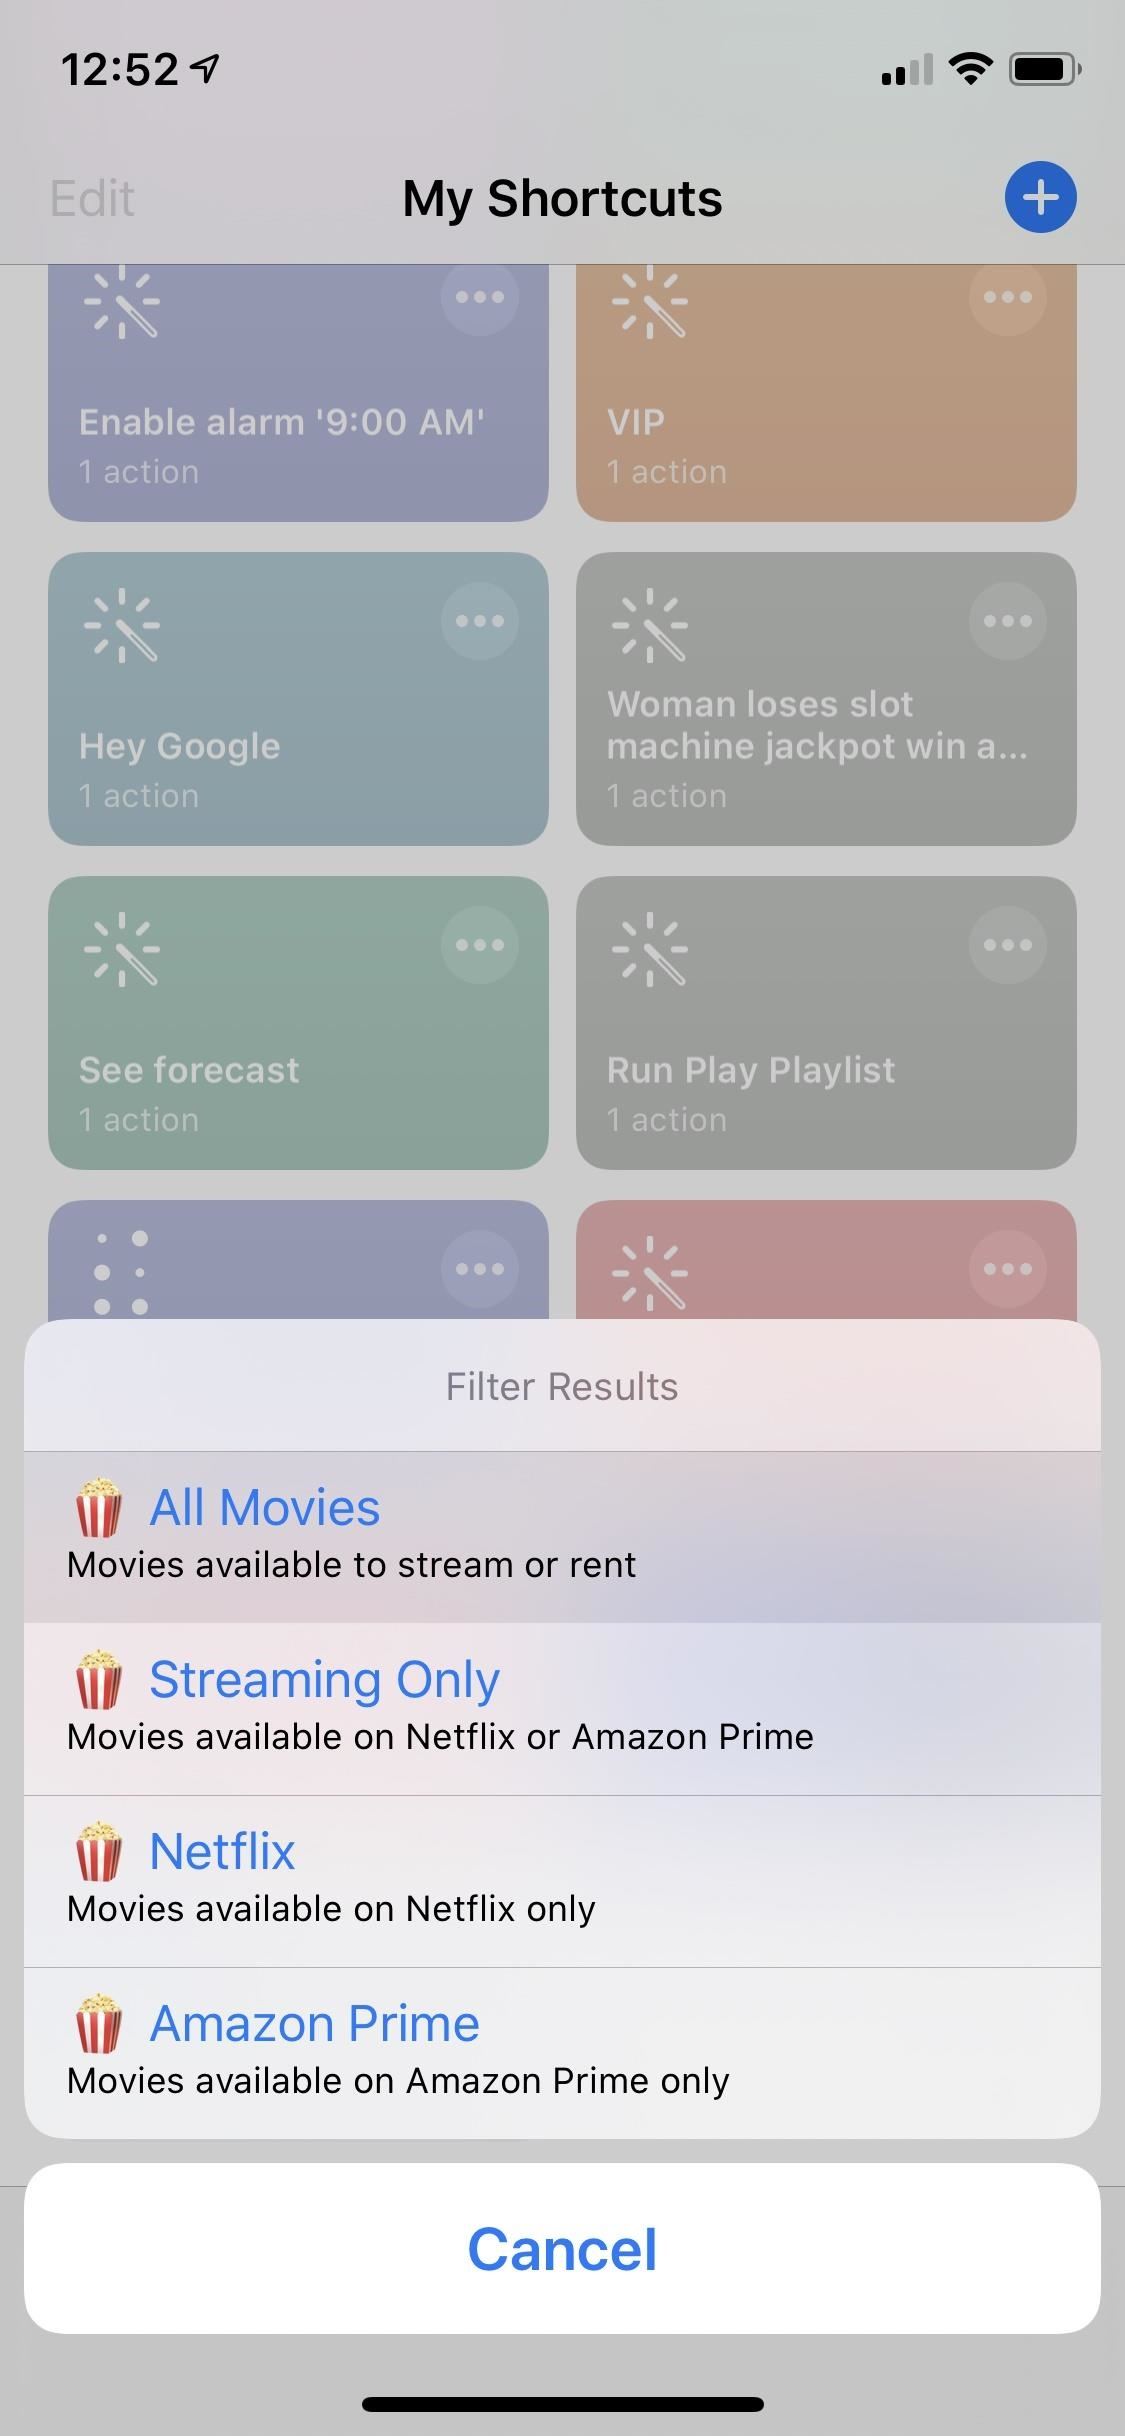 The Easiest Way to Find Good Movies to Watch on Netflix & Prime Video on Your iPhone